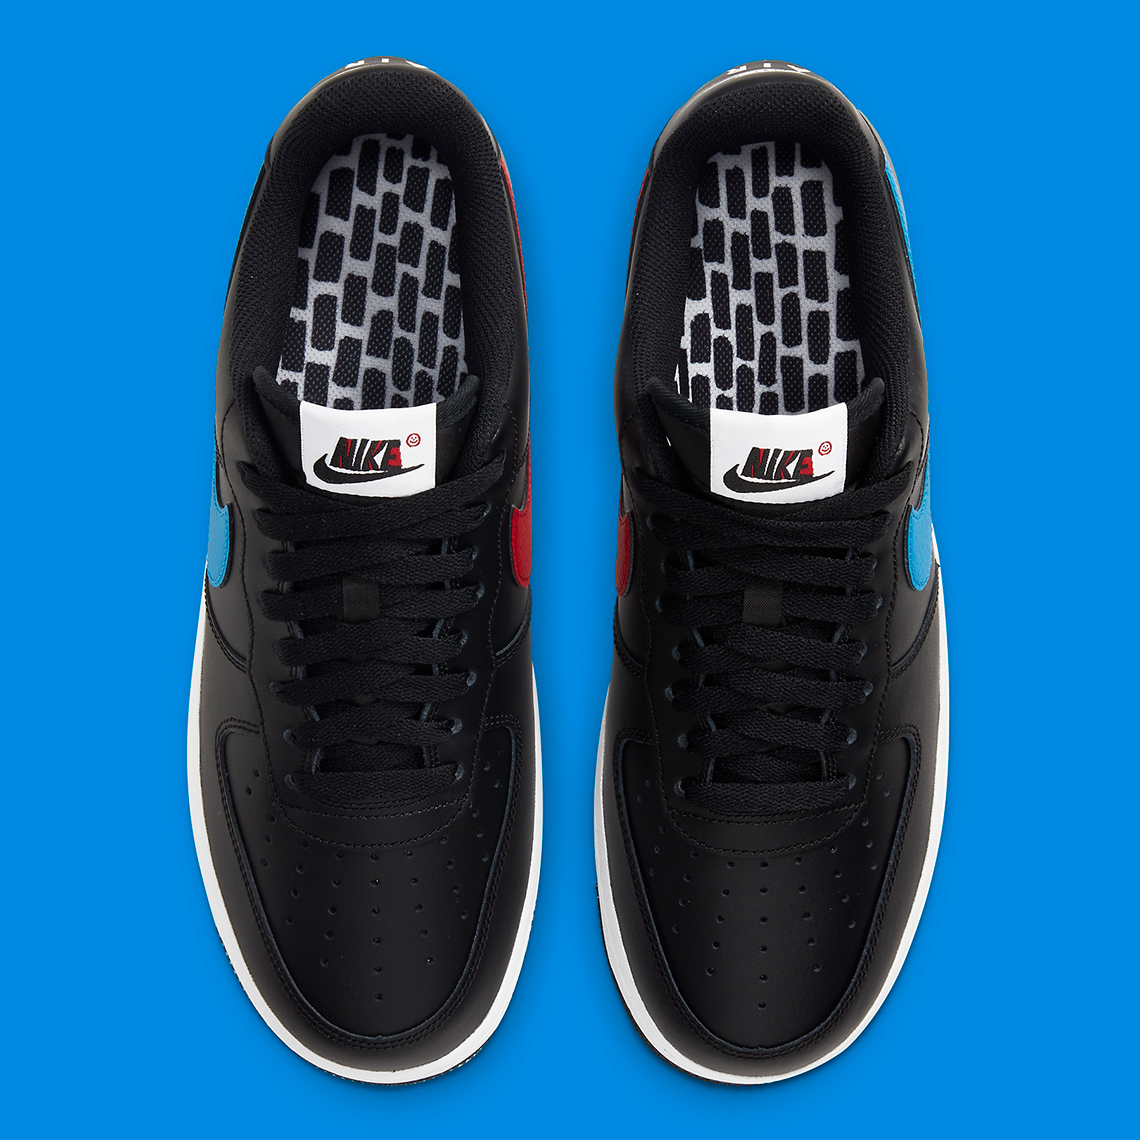 air force 1 black blue and red